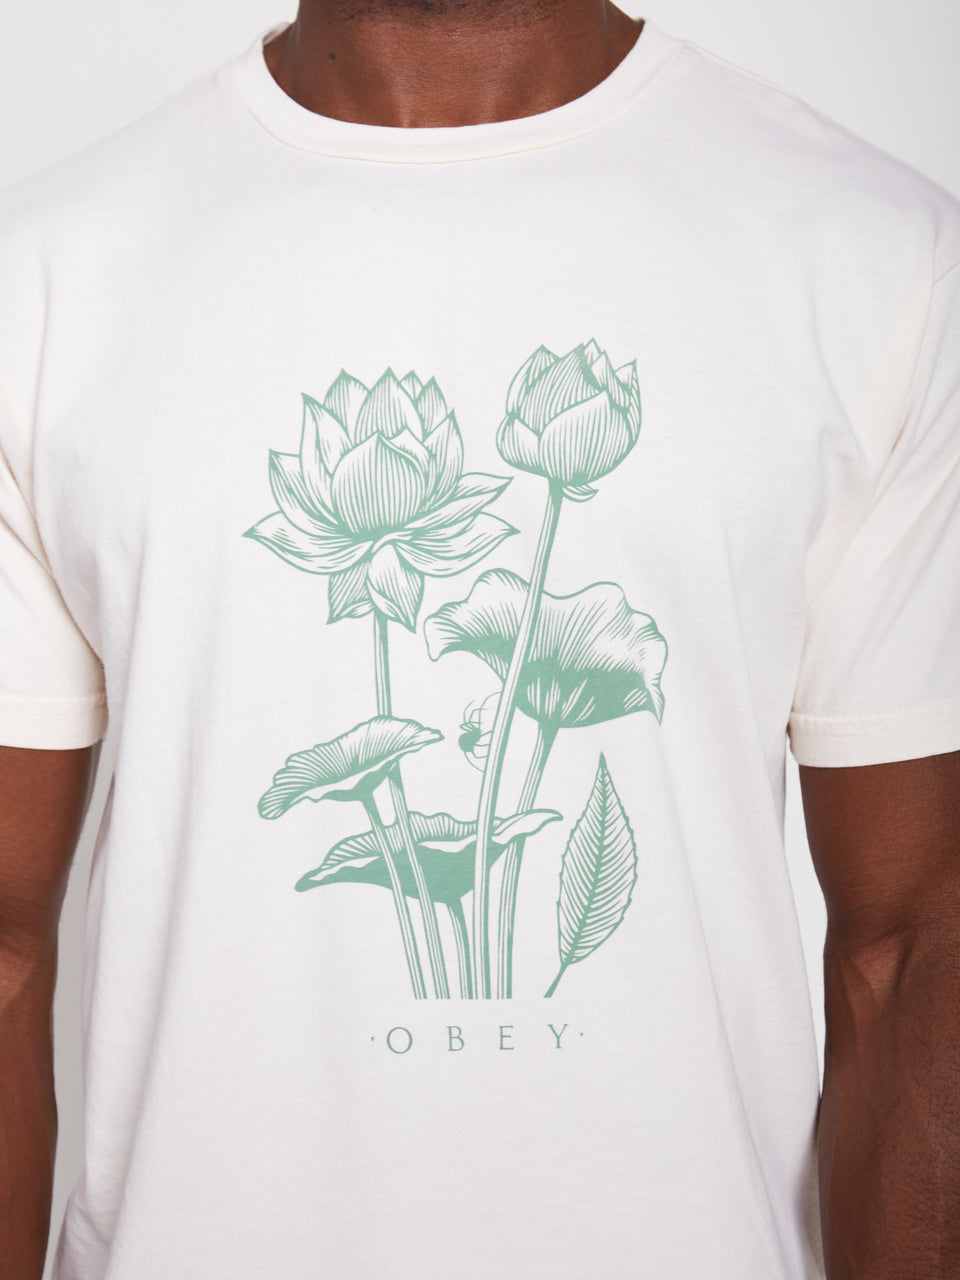 Obey Spider Lotus Tee